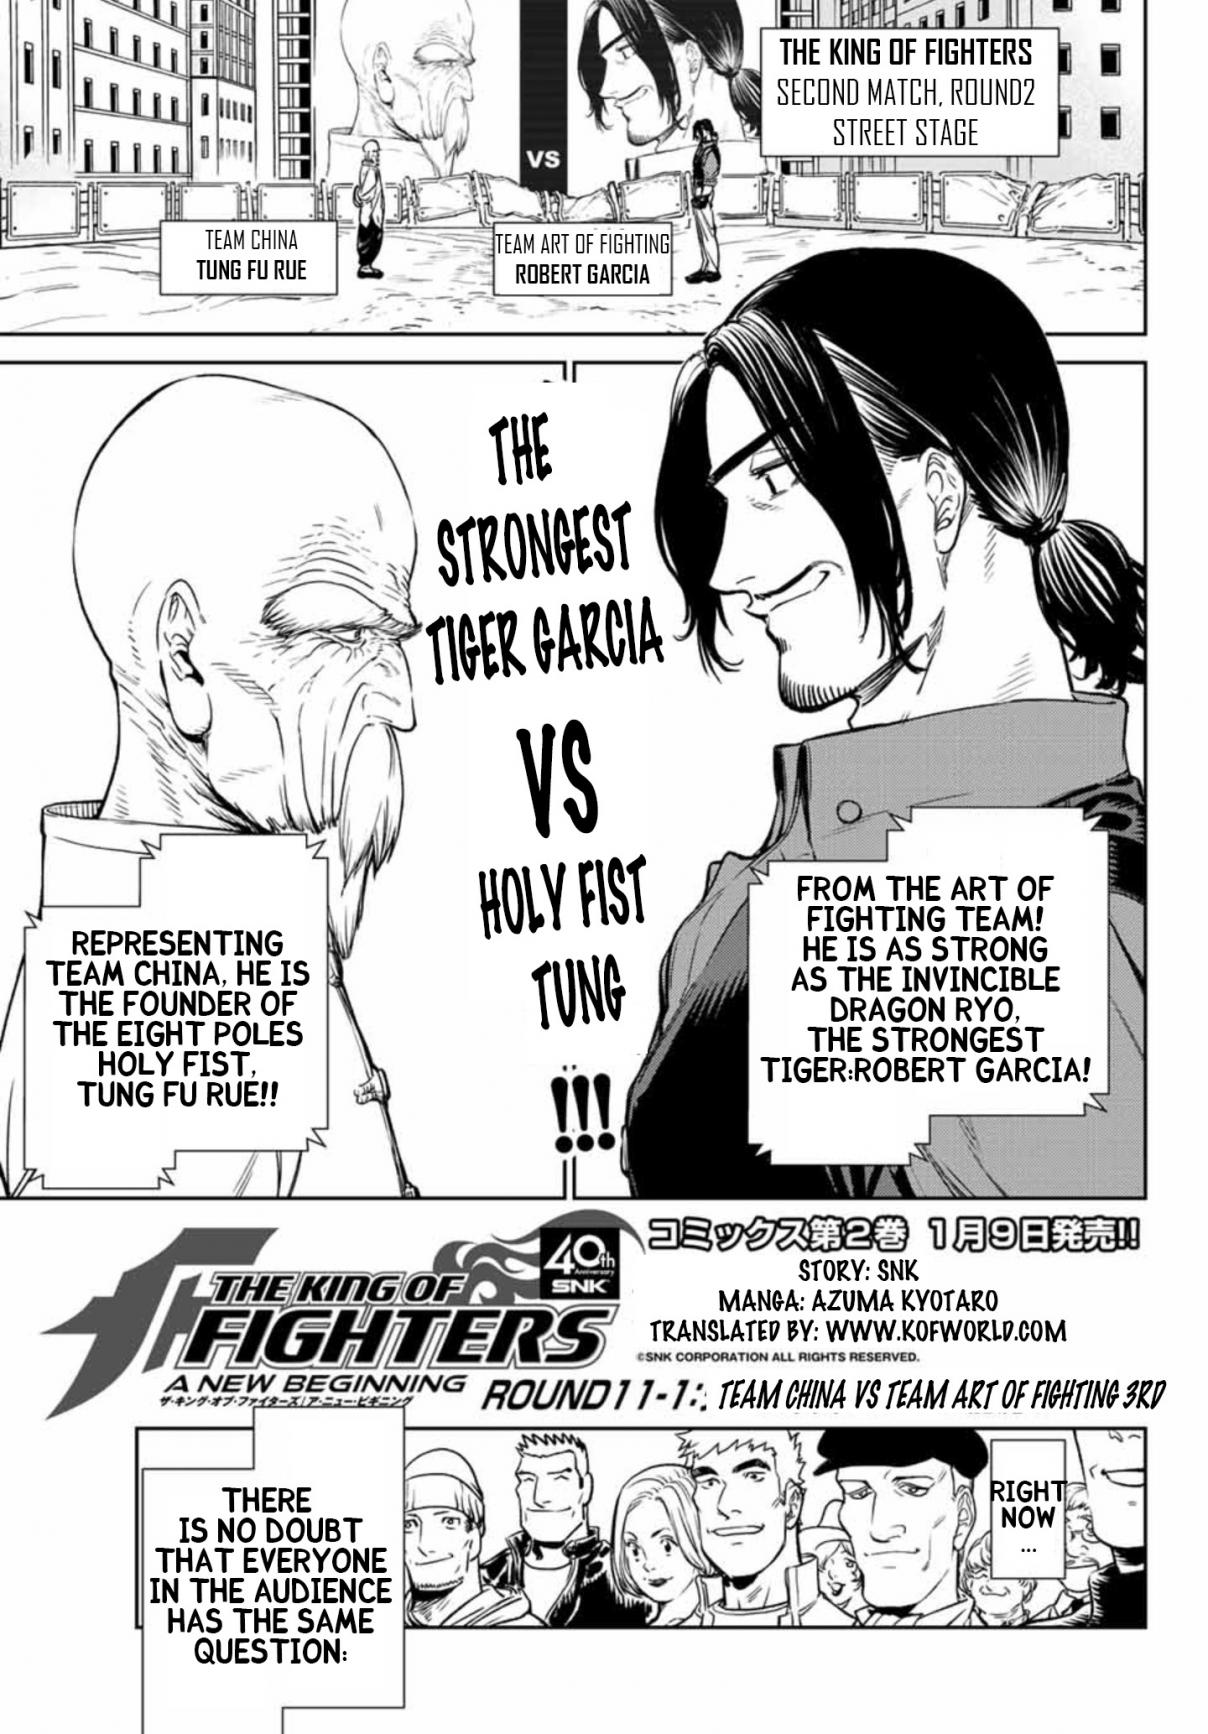 The King of Fighters: A New Beginning Ch. 11.1 Team China vs Team Art of Fighting 3rd